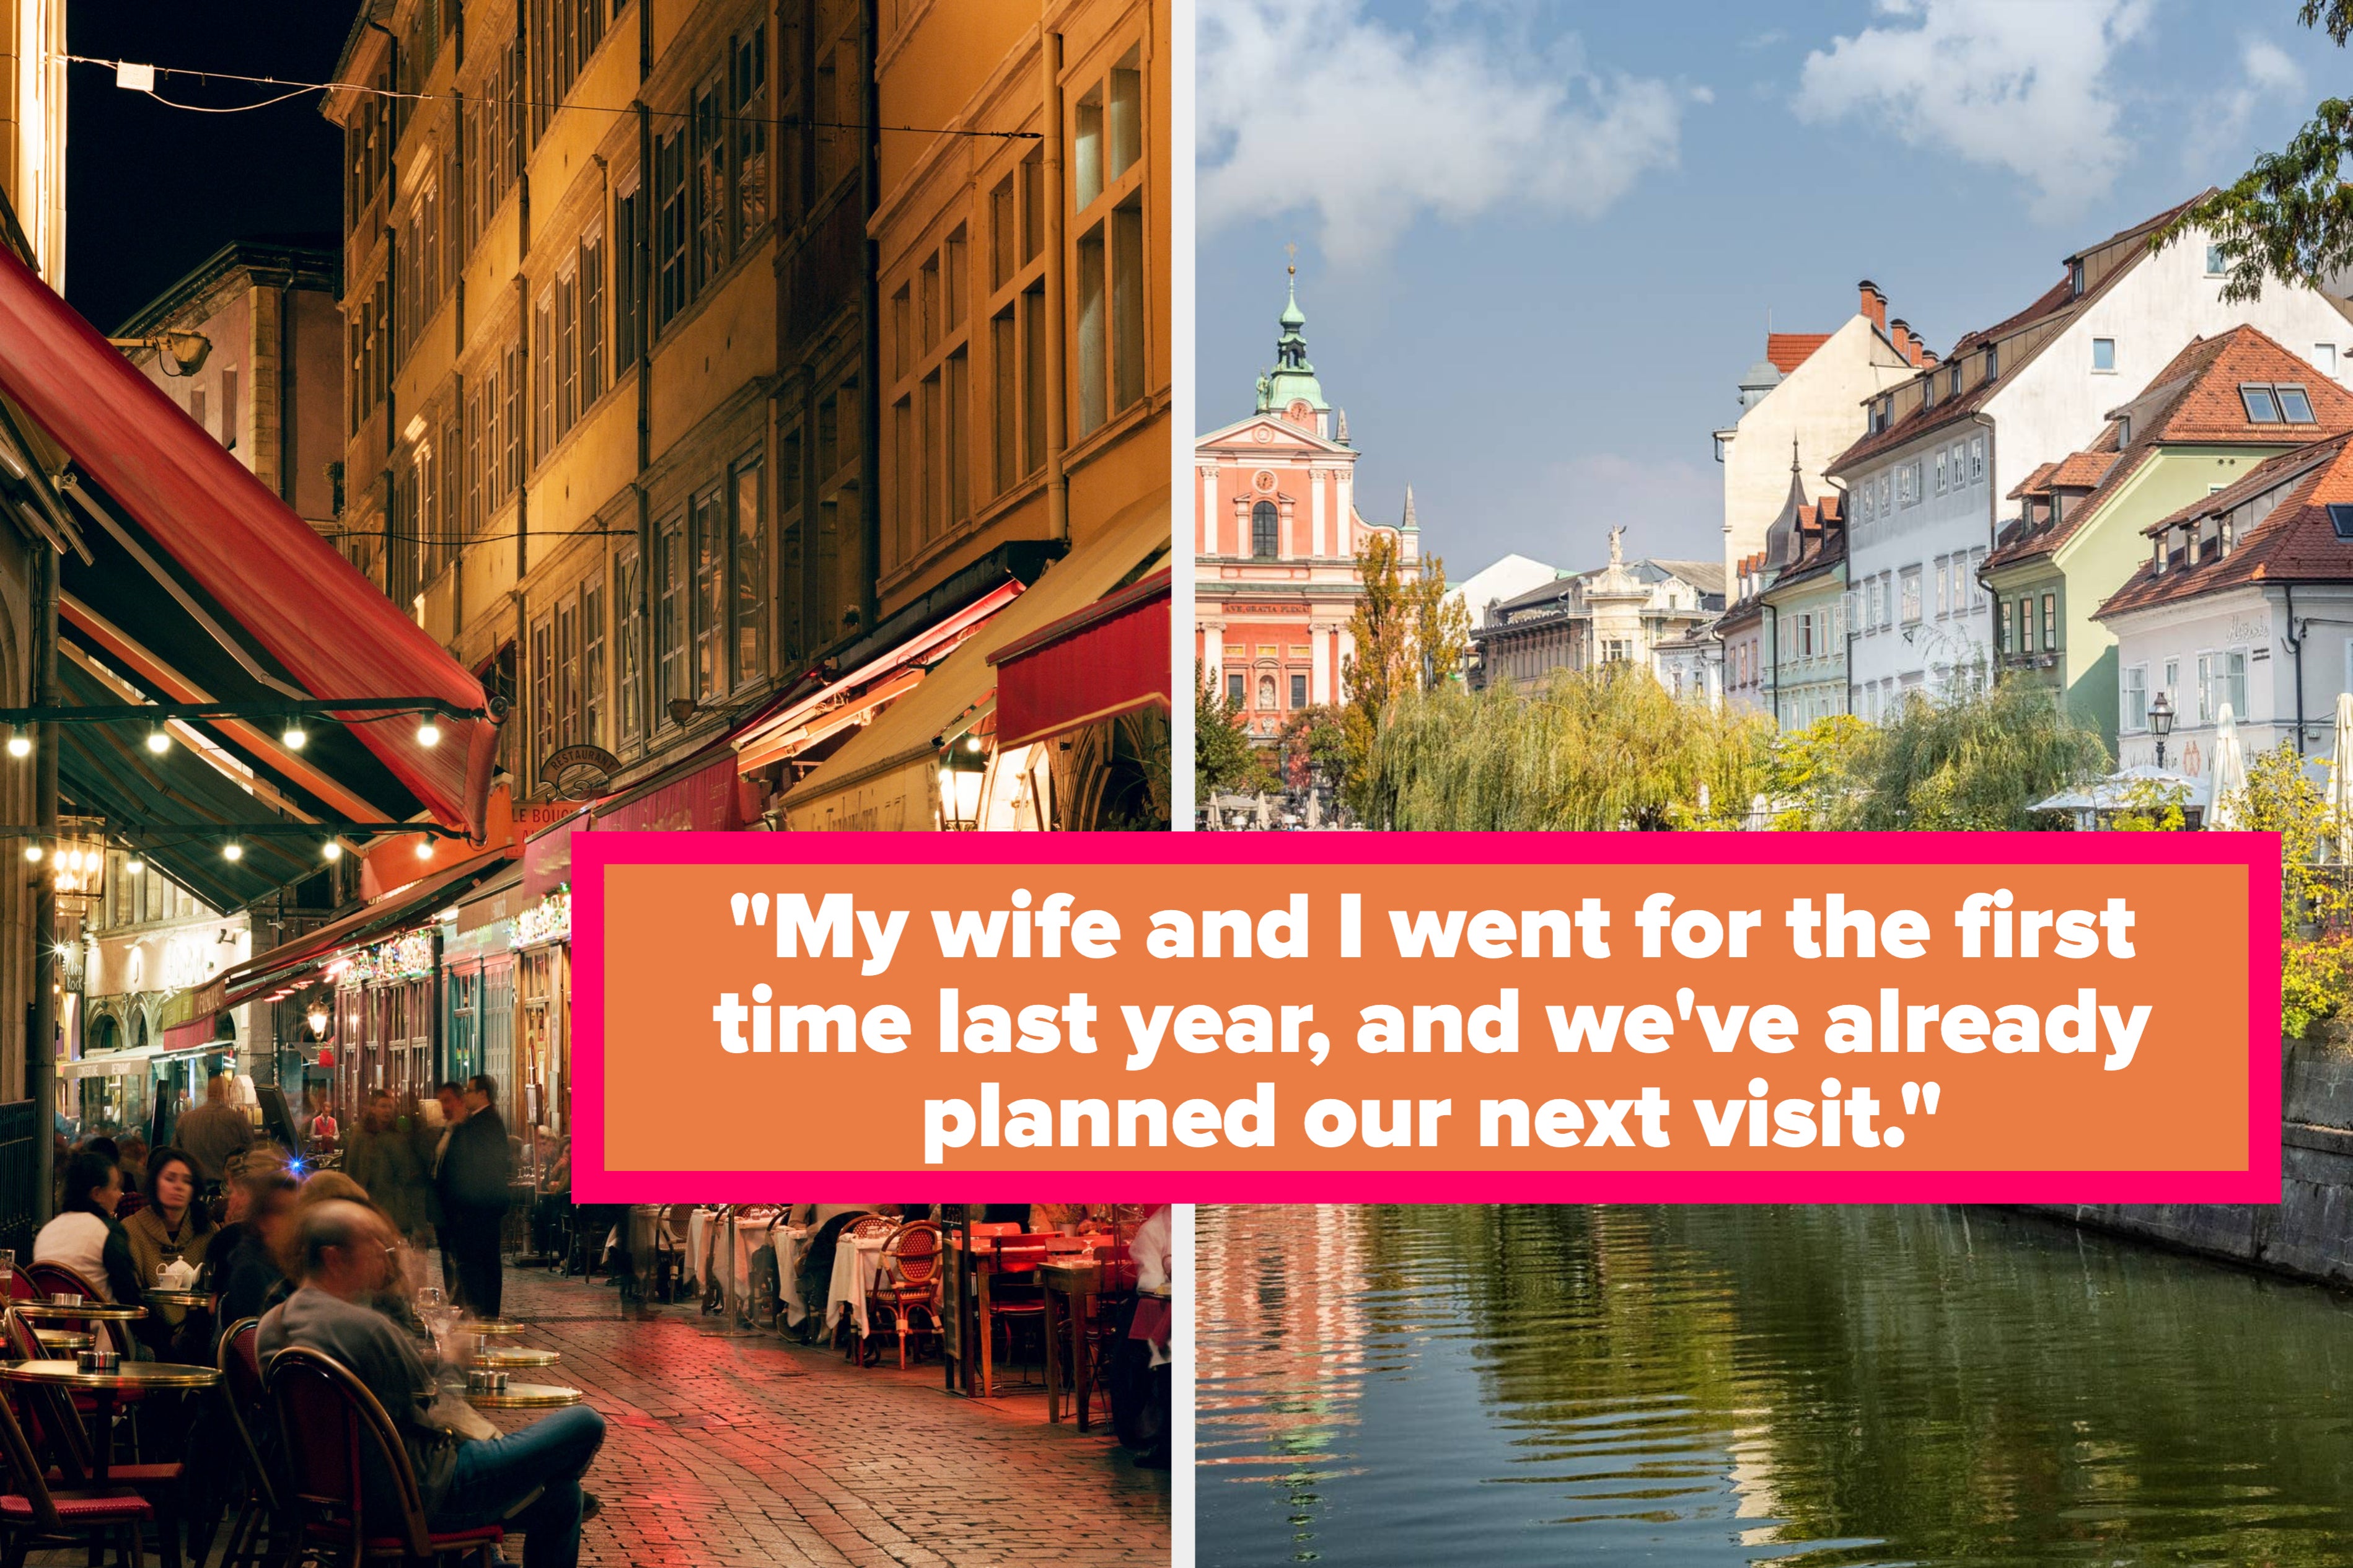 "I Fell In Love With Every Last Thing About This Country": People Who Love To Travel Are Sharing Destinations That Deserve Way More Hype